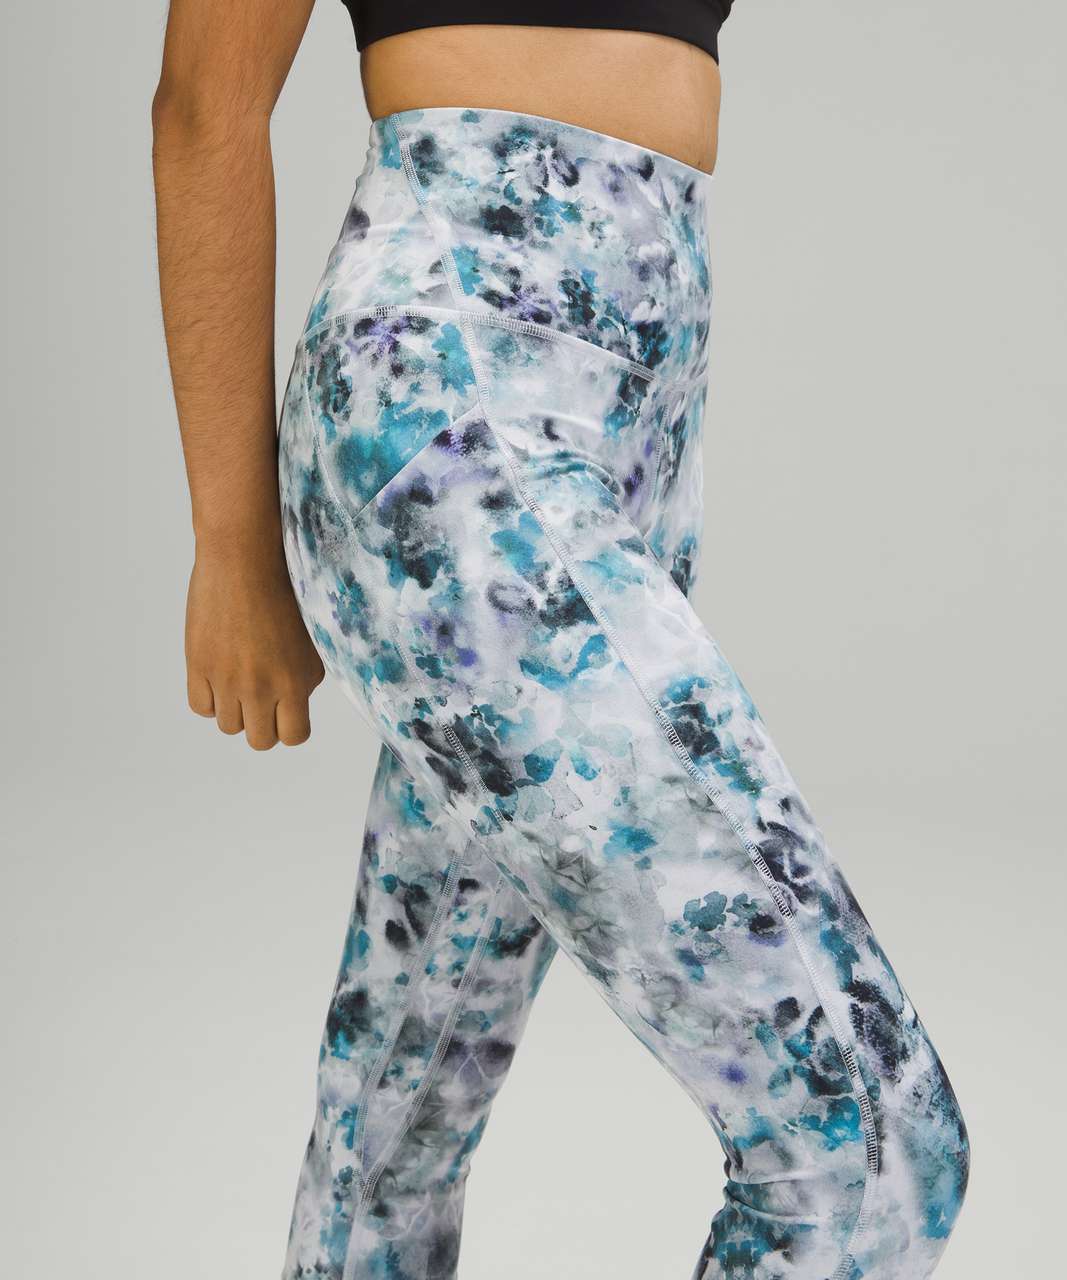 Lululemon Align High Rise Crop with Pockets 23" - Kaleidofloral Multi